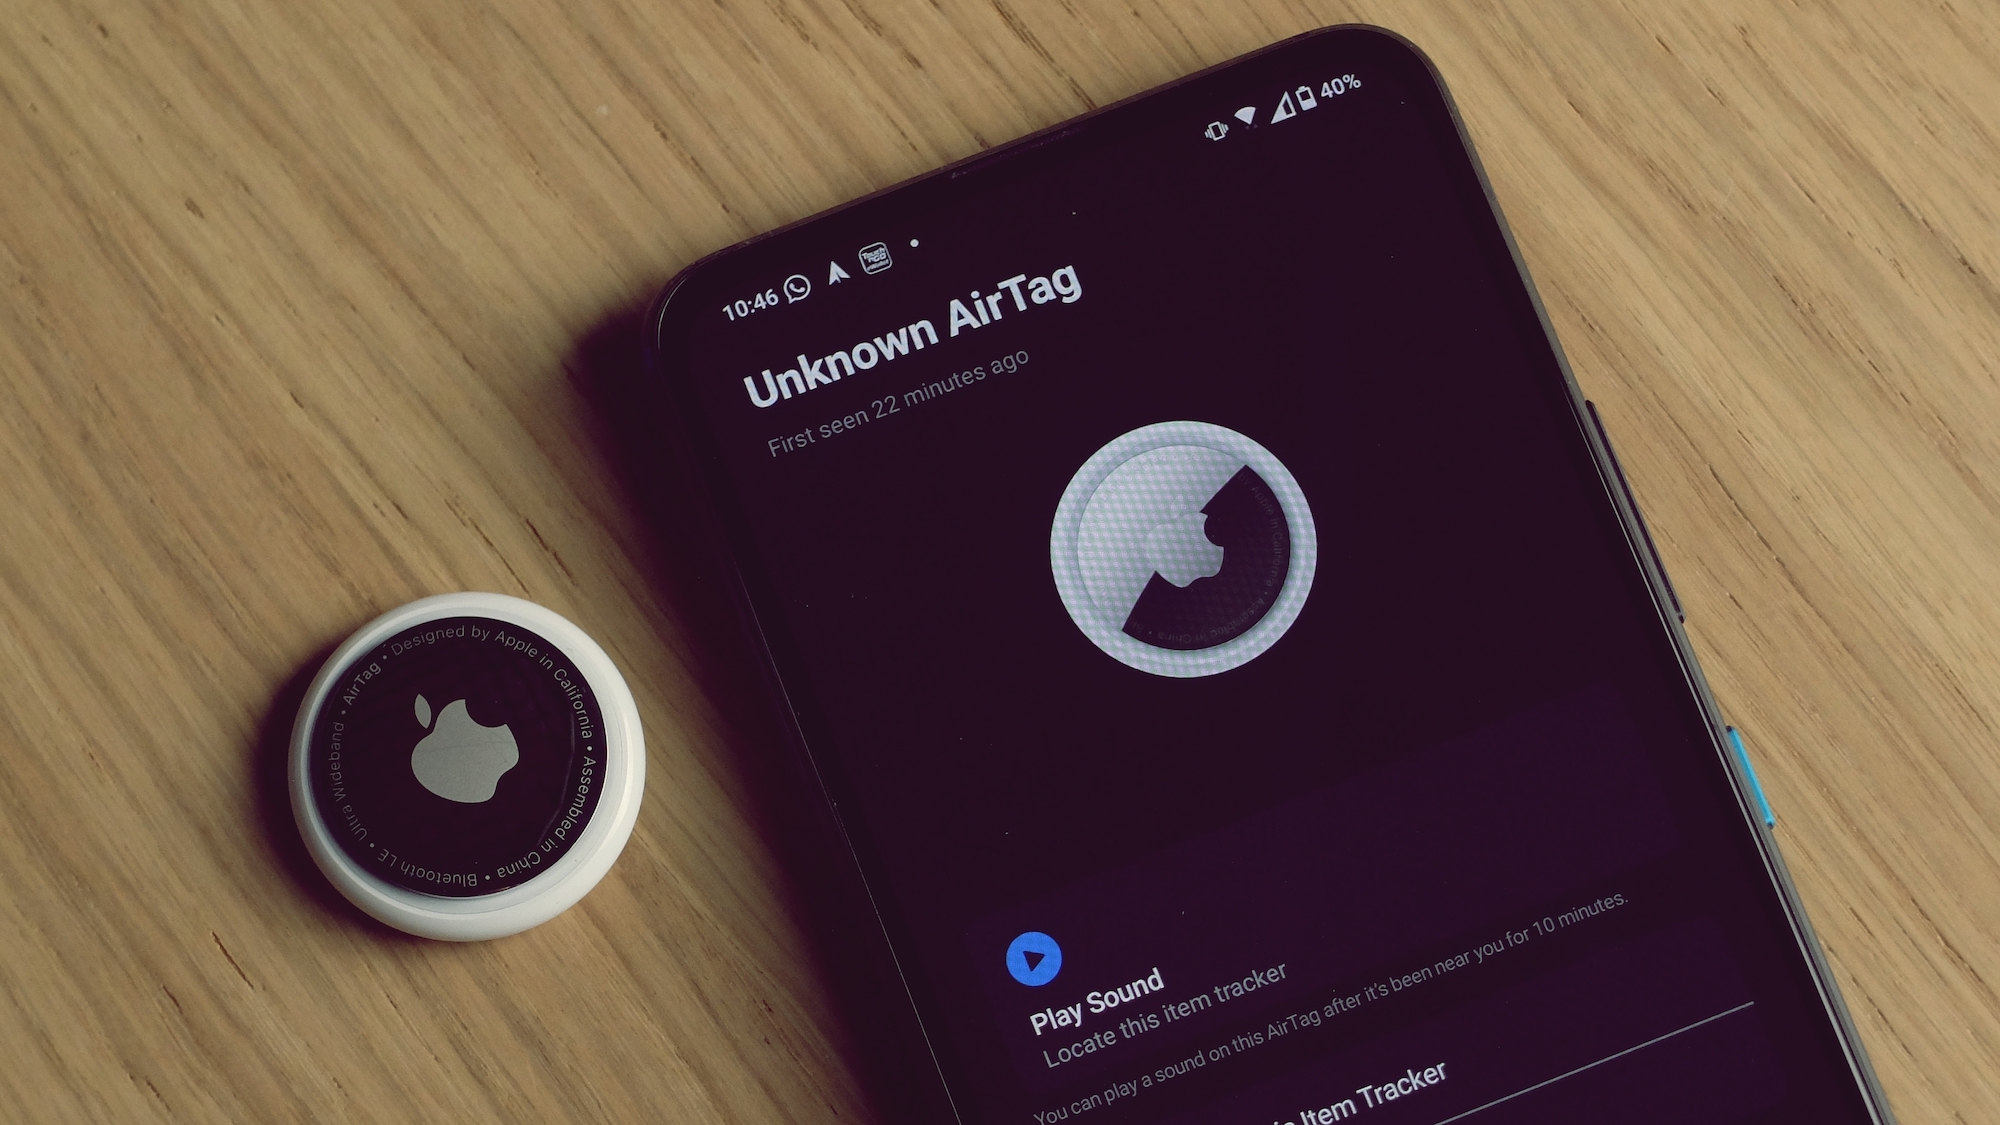 Get alerts for unknown AirTags on an Android. Here's how.